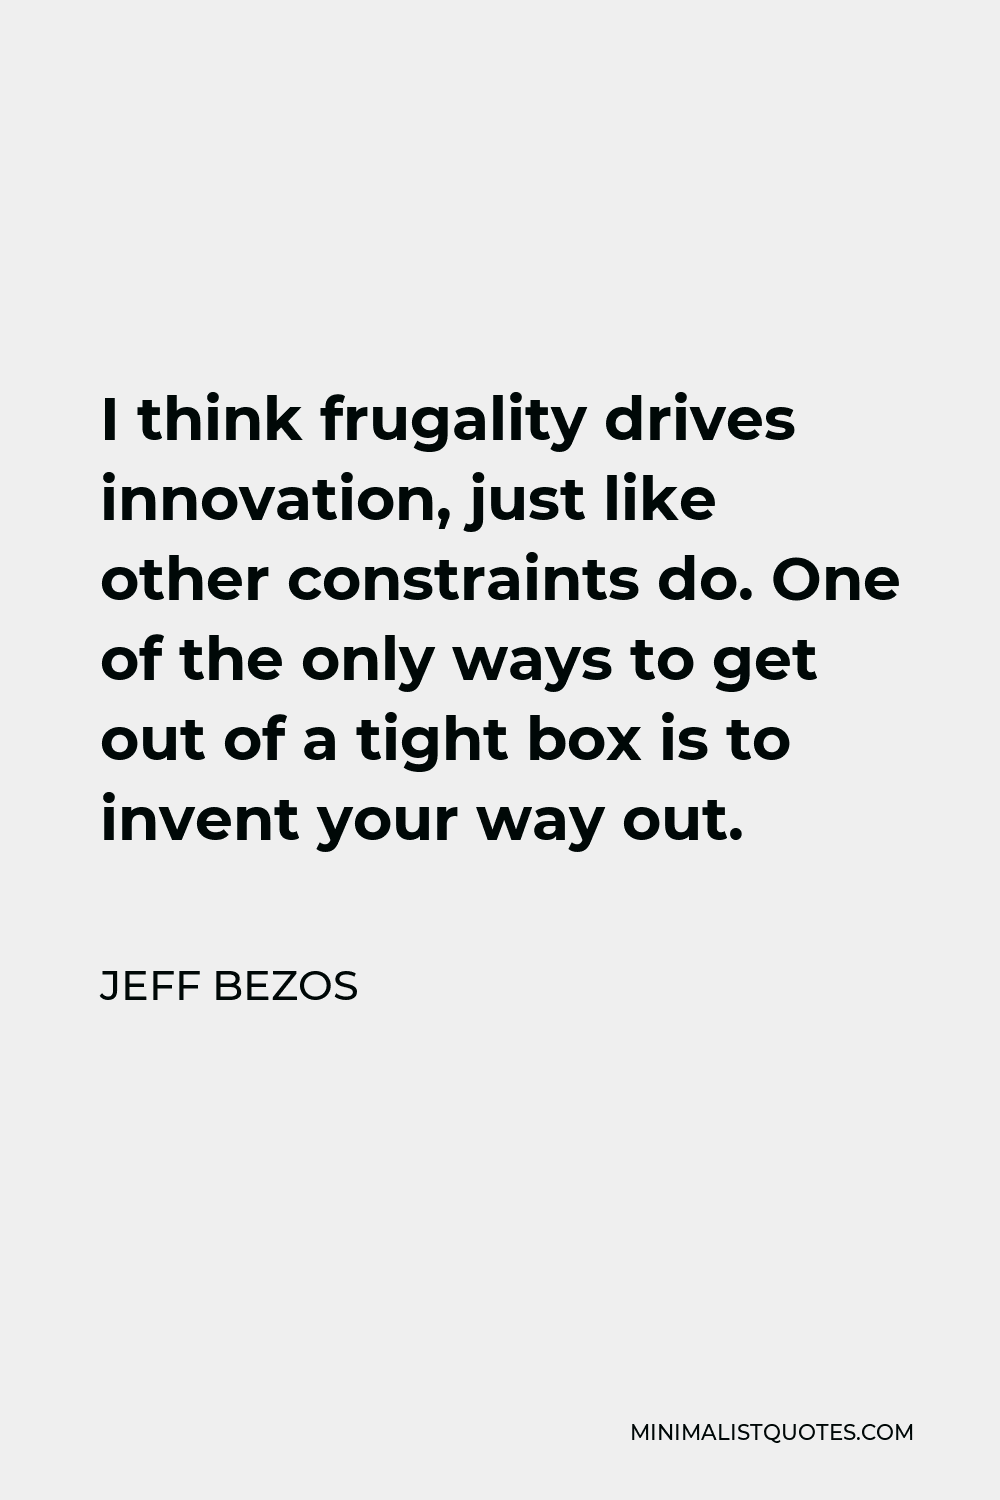 Jeff Bezos Quote - I think frugality drives innovation, just like other constraints do. One of the only ways to get out of a tight box is to invent your way out.